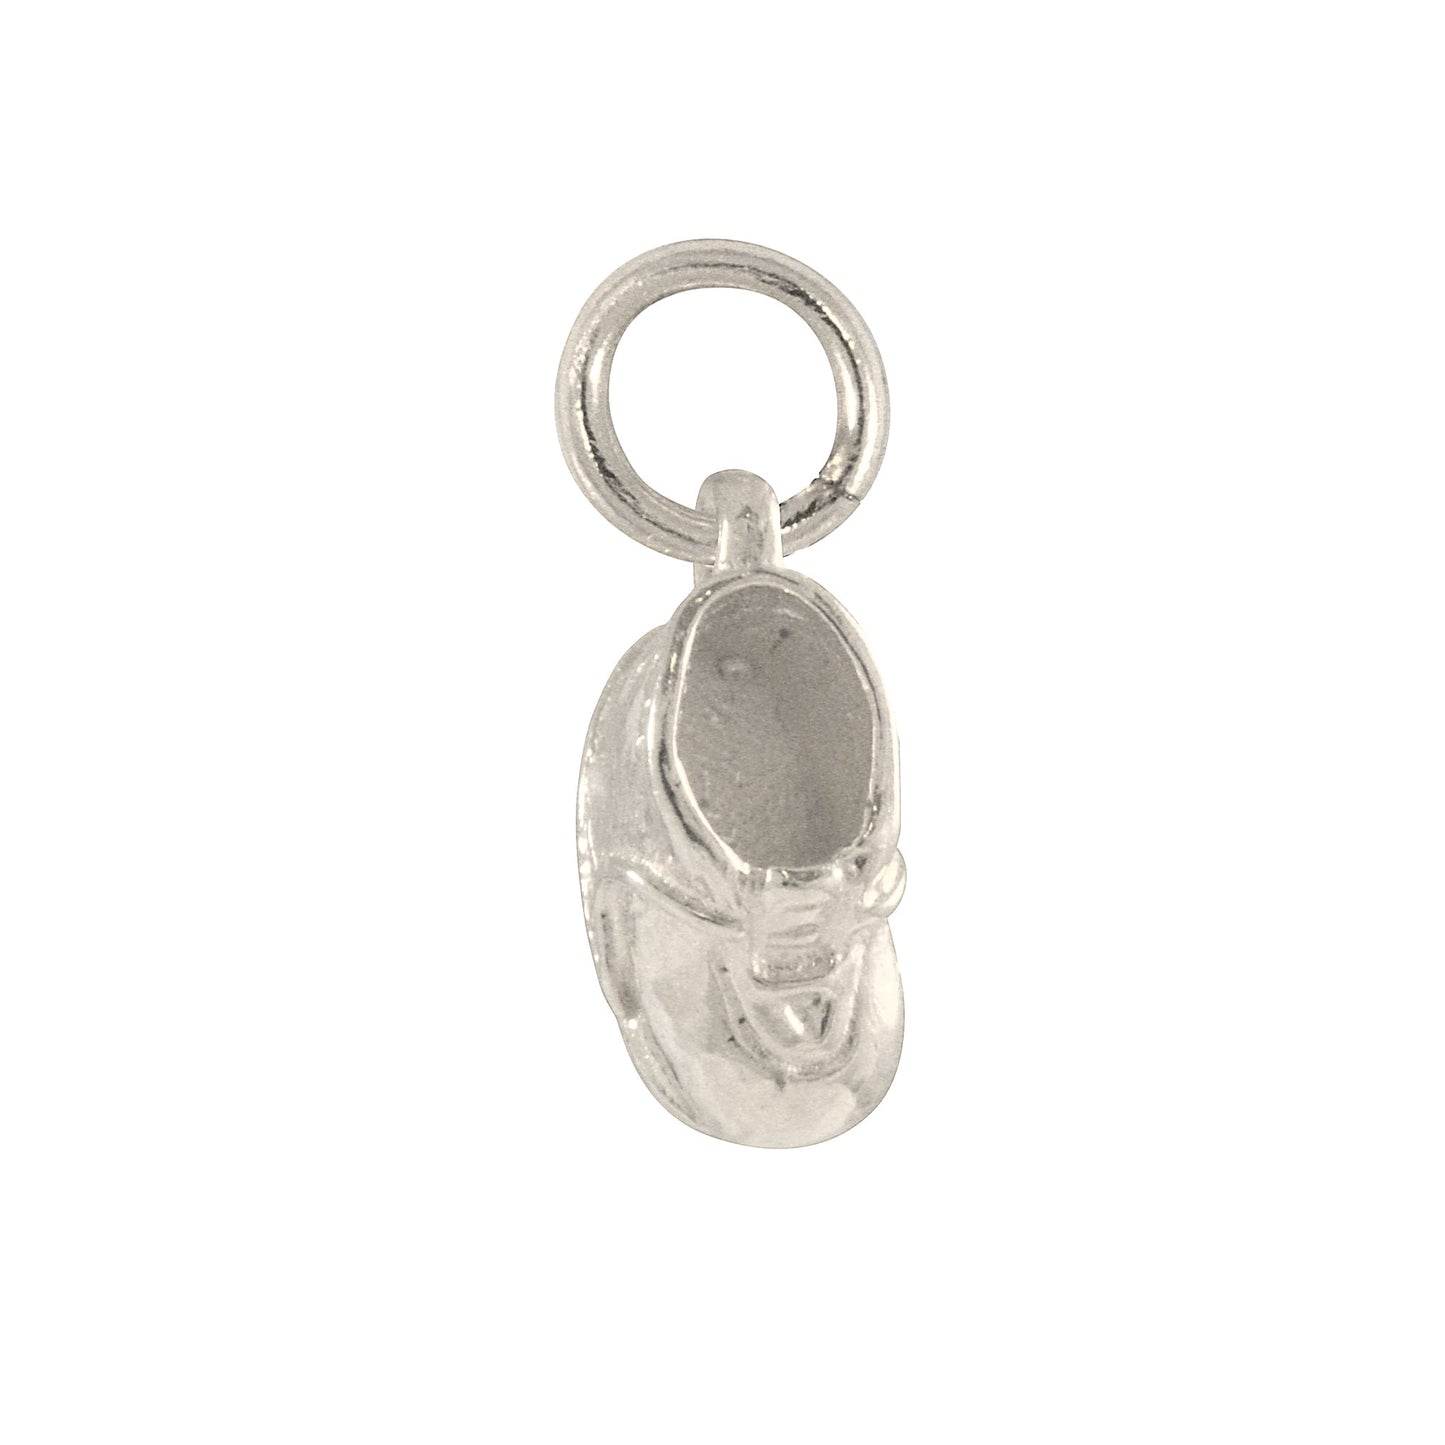 9ct White Gold Baby Shoe Charm